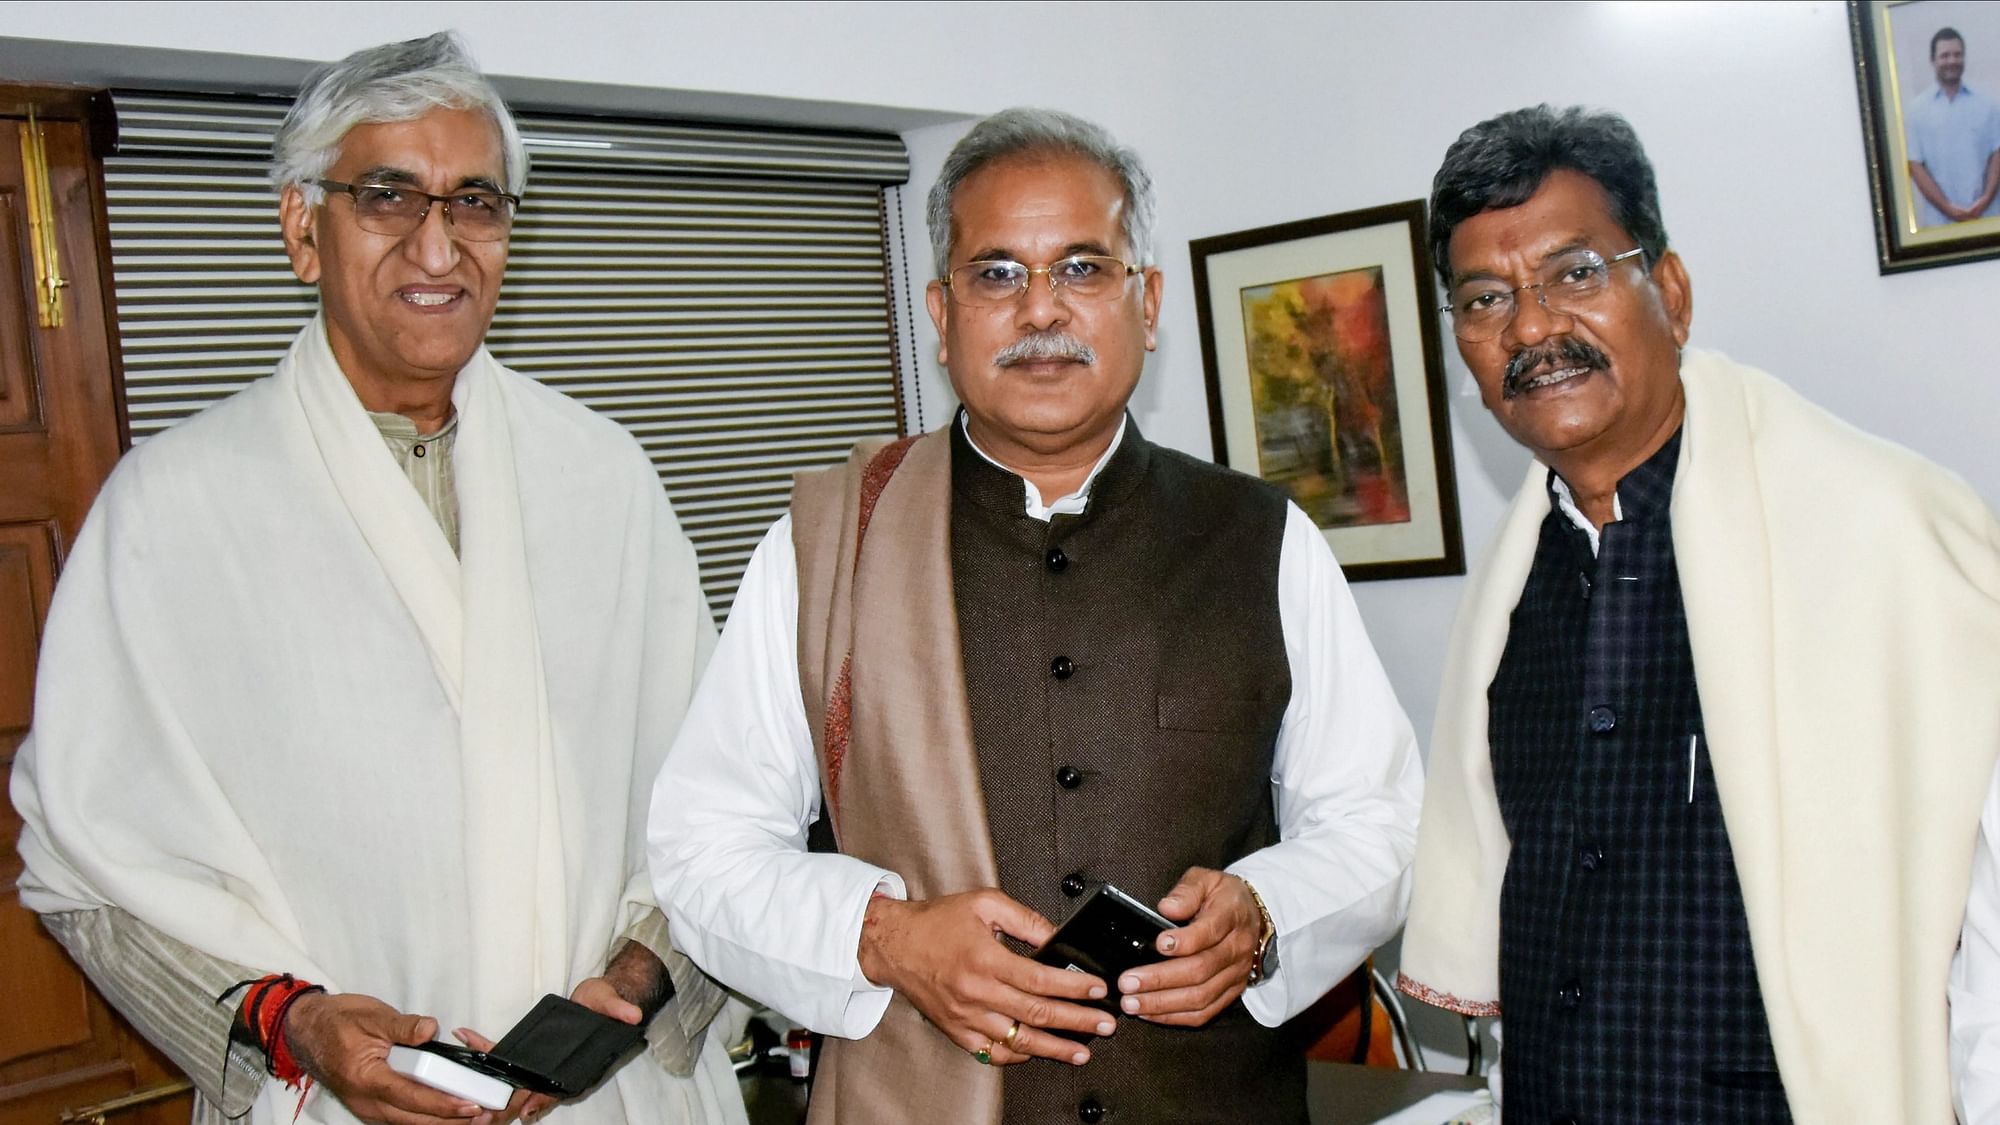 Senior leaders of Congress party’s Chhattisgarh unit, from left, TS Singh Deo, Bhupesh Baghel and Charan Das Mahant in Delhi.